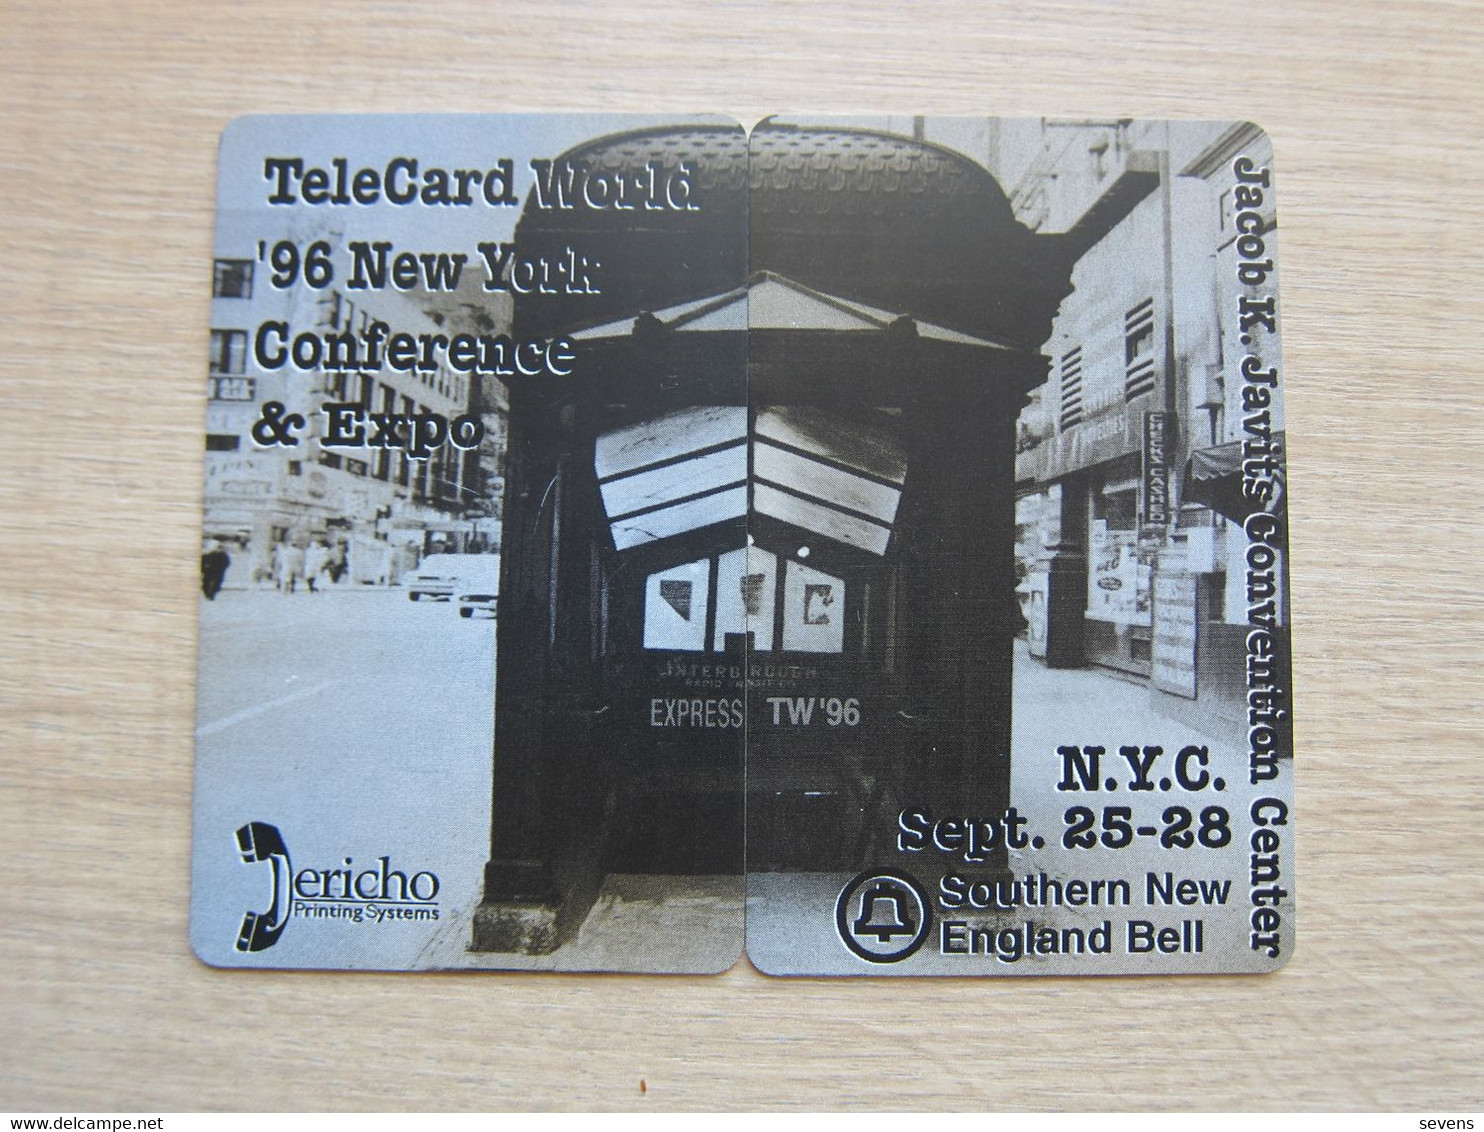 Telecard World '96 New York Phoecard Fair,puzzle Set Of 2, Mint Expired, 500 Sets Issued Only - Bellsouth